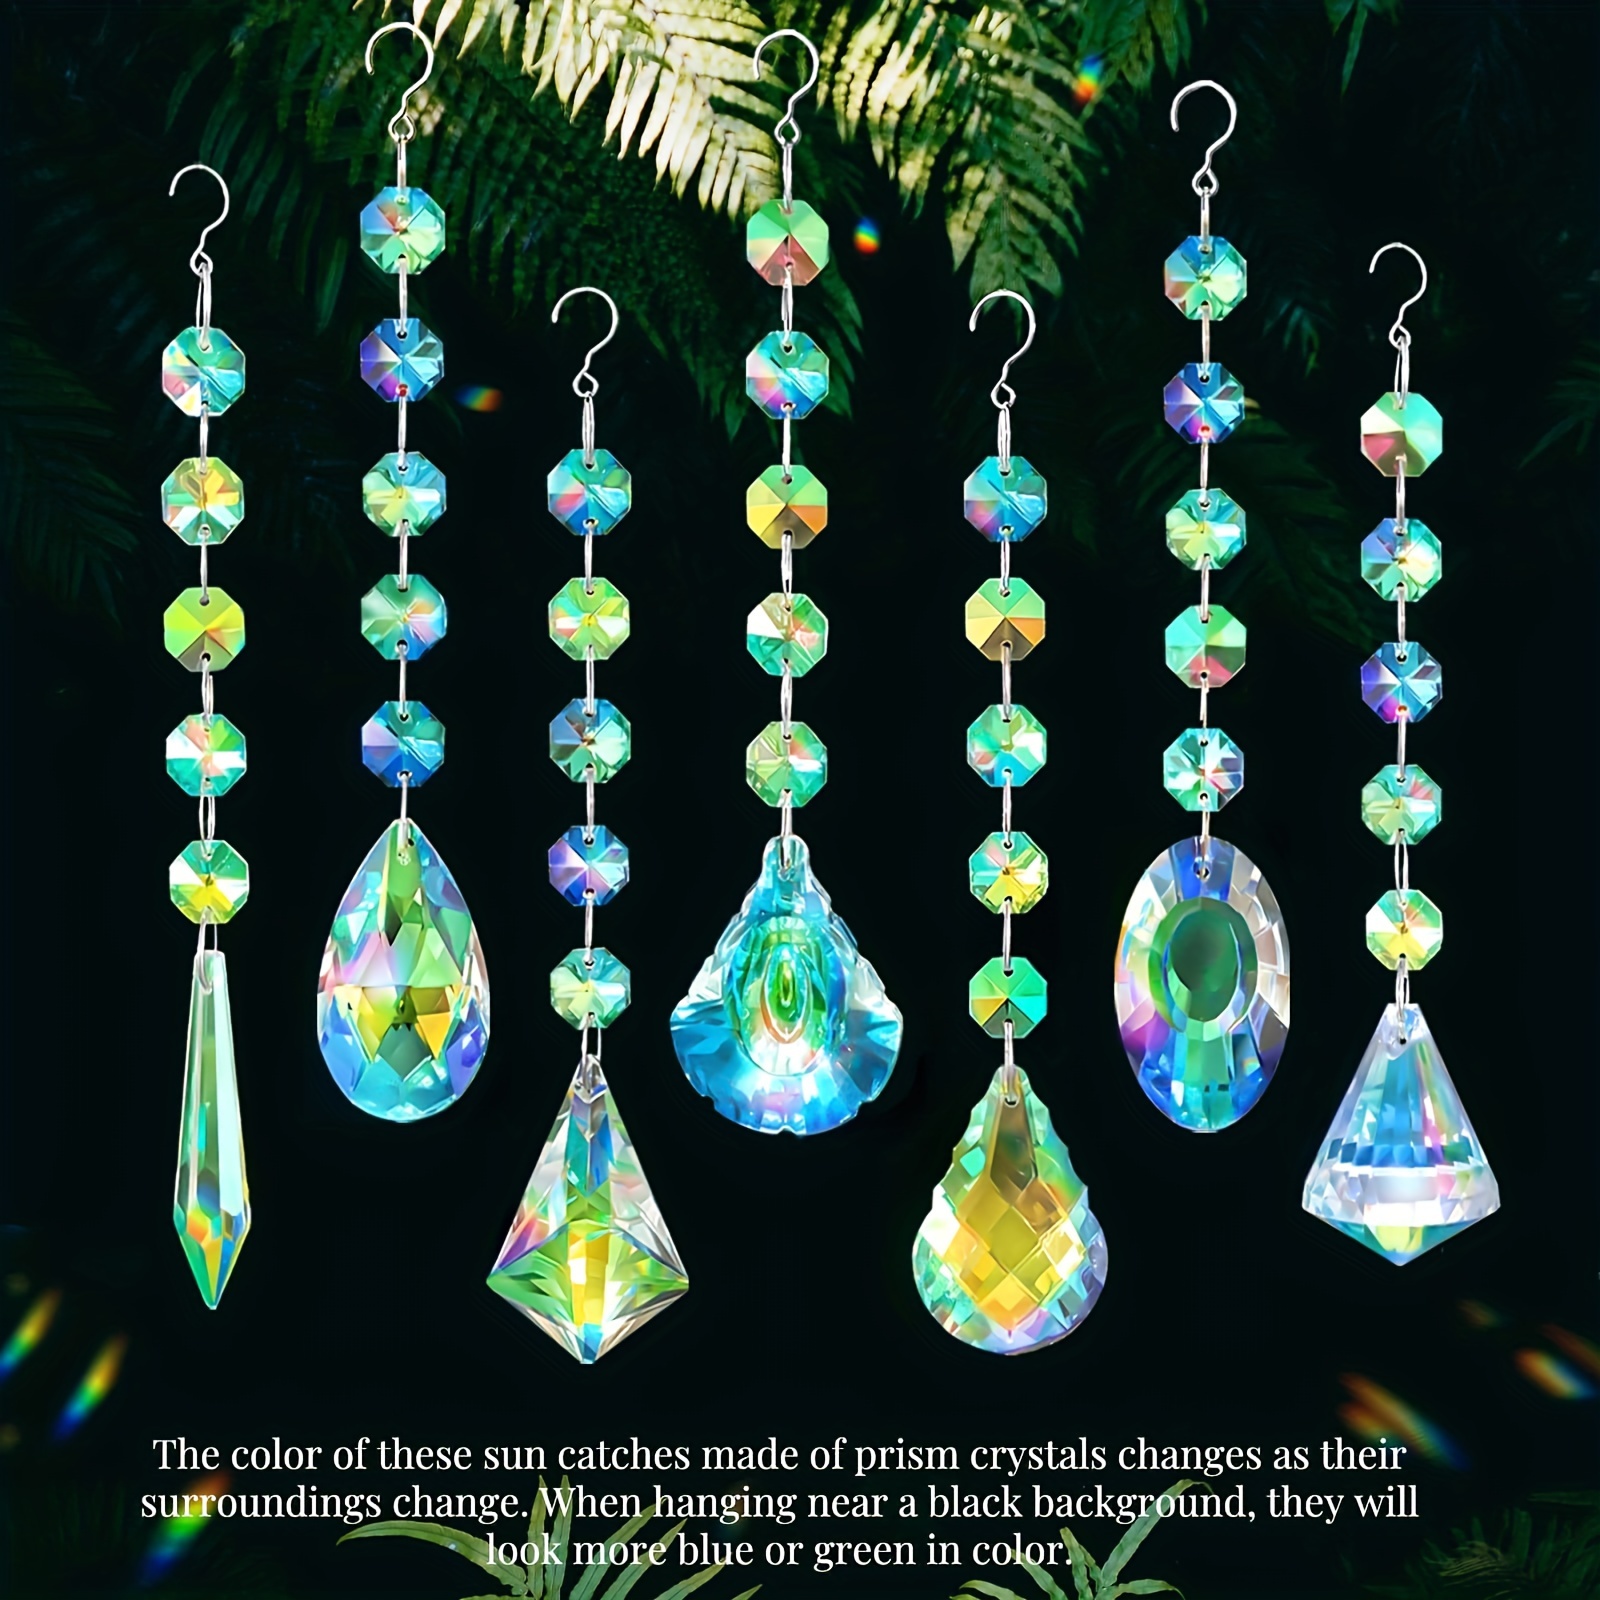 

7pcs Crystal Sun Catcher, Colorful Hanging Crystals Suncatchers Prism With Chain Pendant Ornament For Home Garden Window Party Wedding Decorations